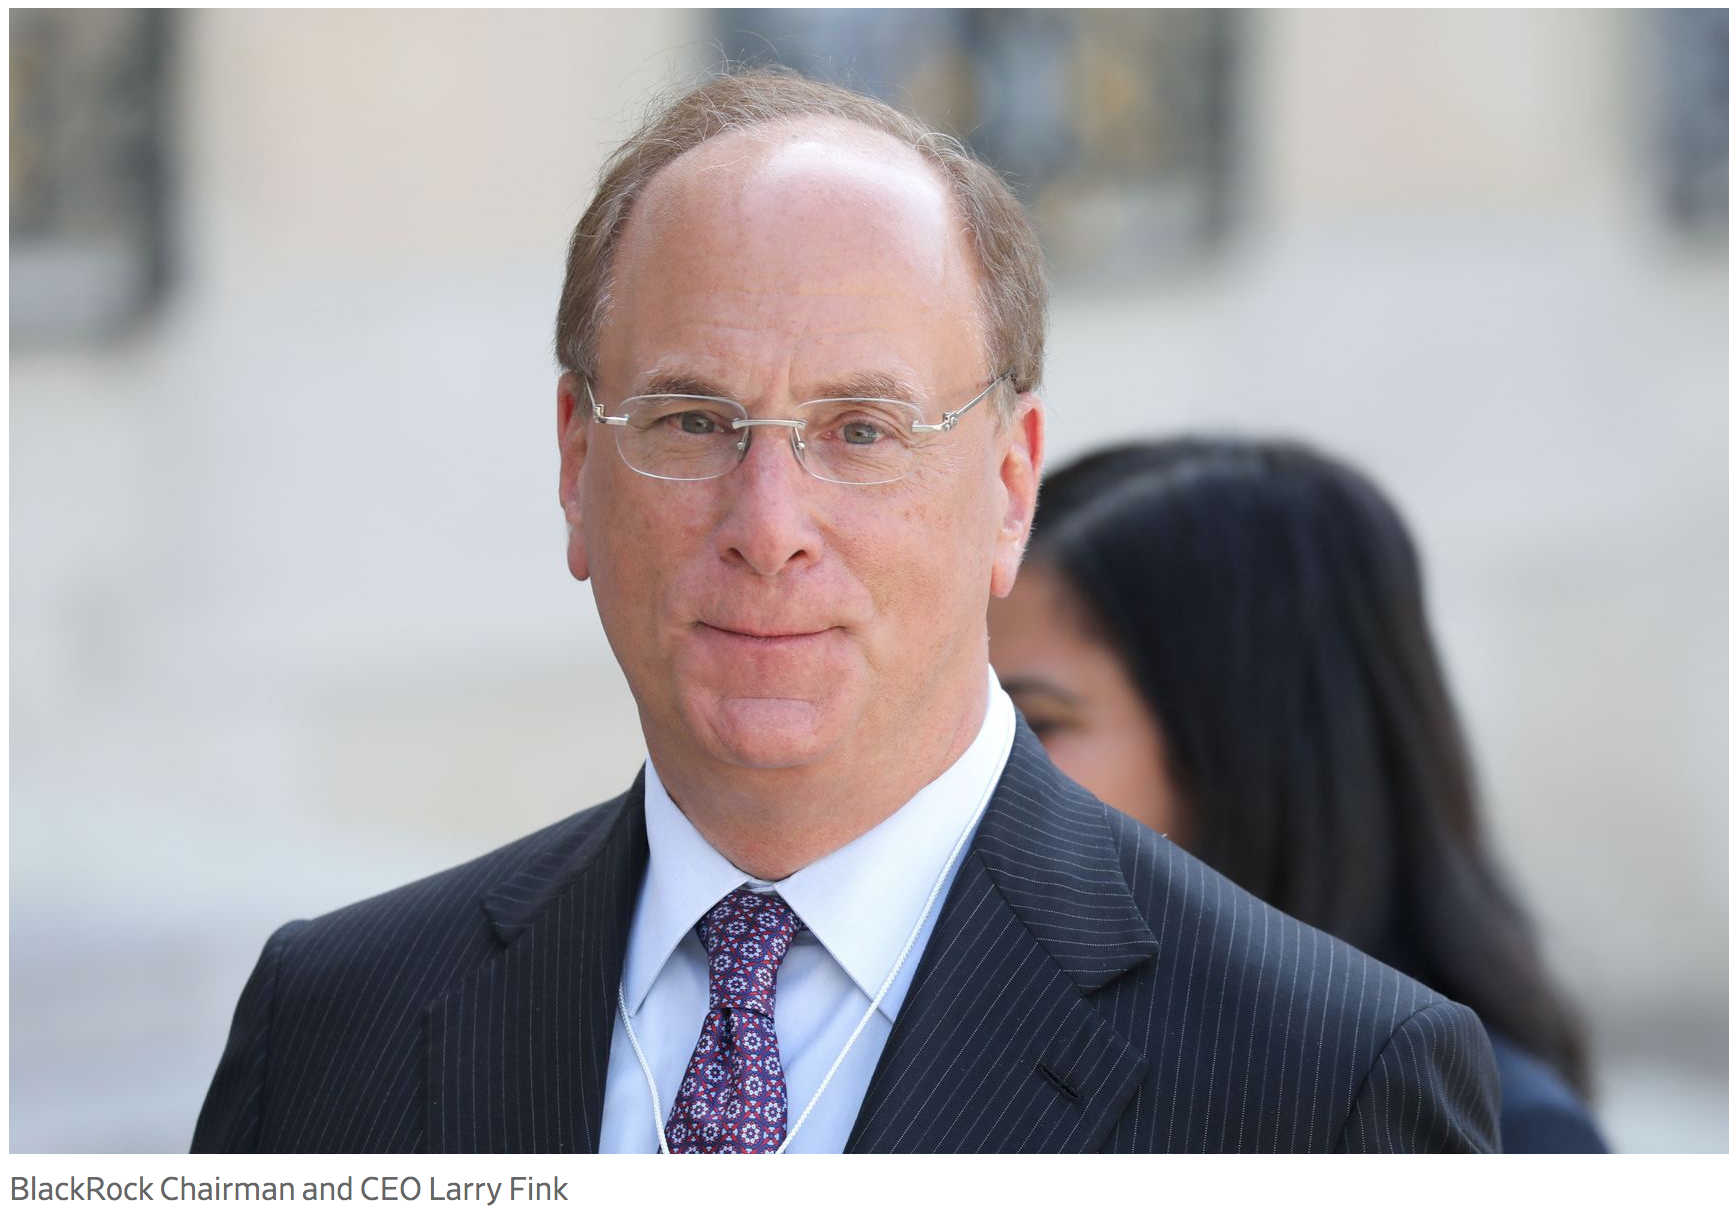 BlackRock CEO Larry Fink ($10Trillion AUM) Has Unchecked Influence In Financial Markets And Needs To Be Reined In